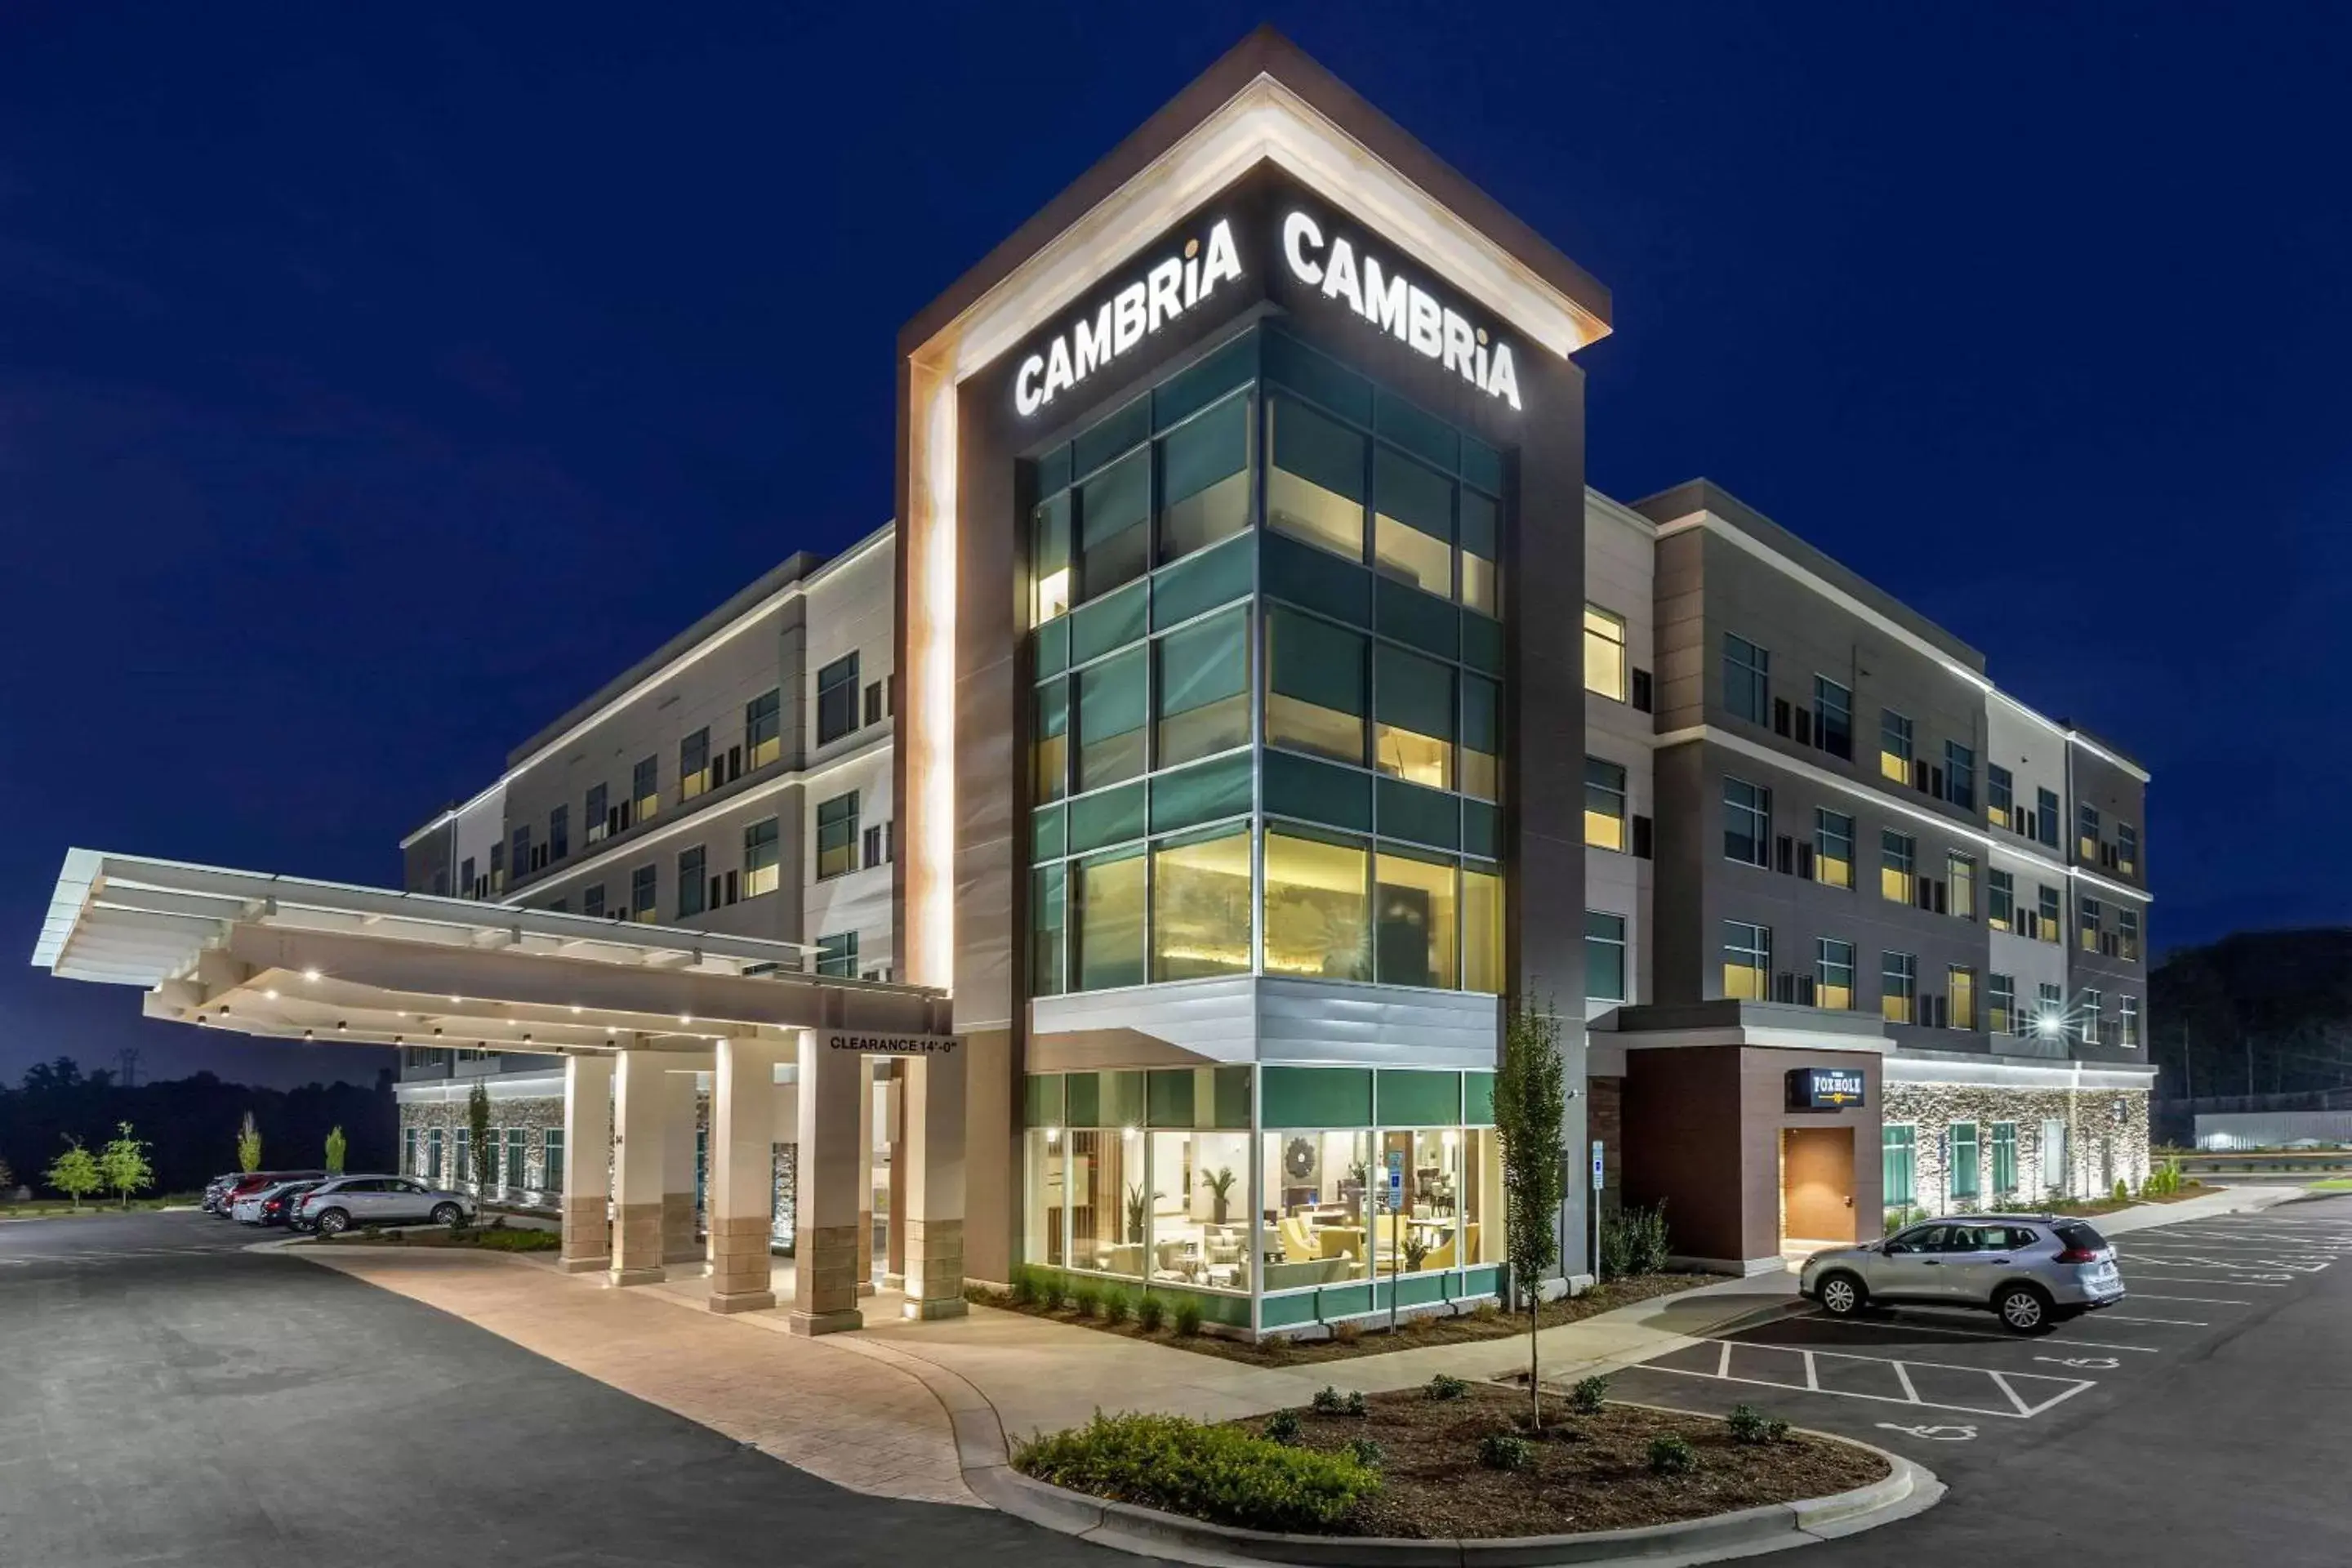 Property Building in Cambria Hotel Fort Mill